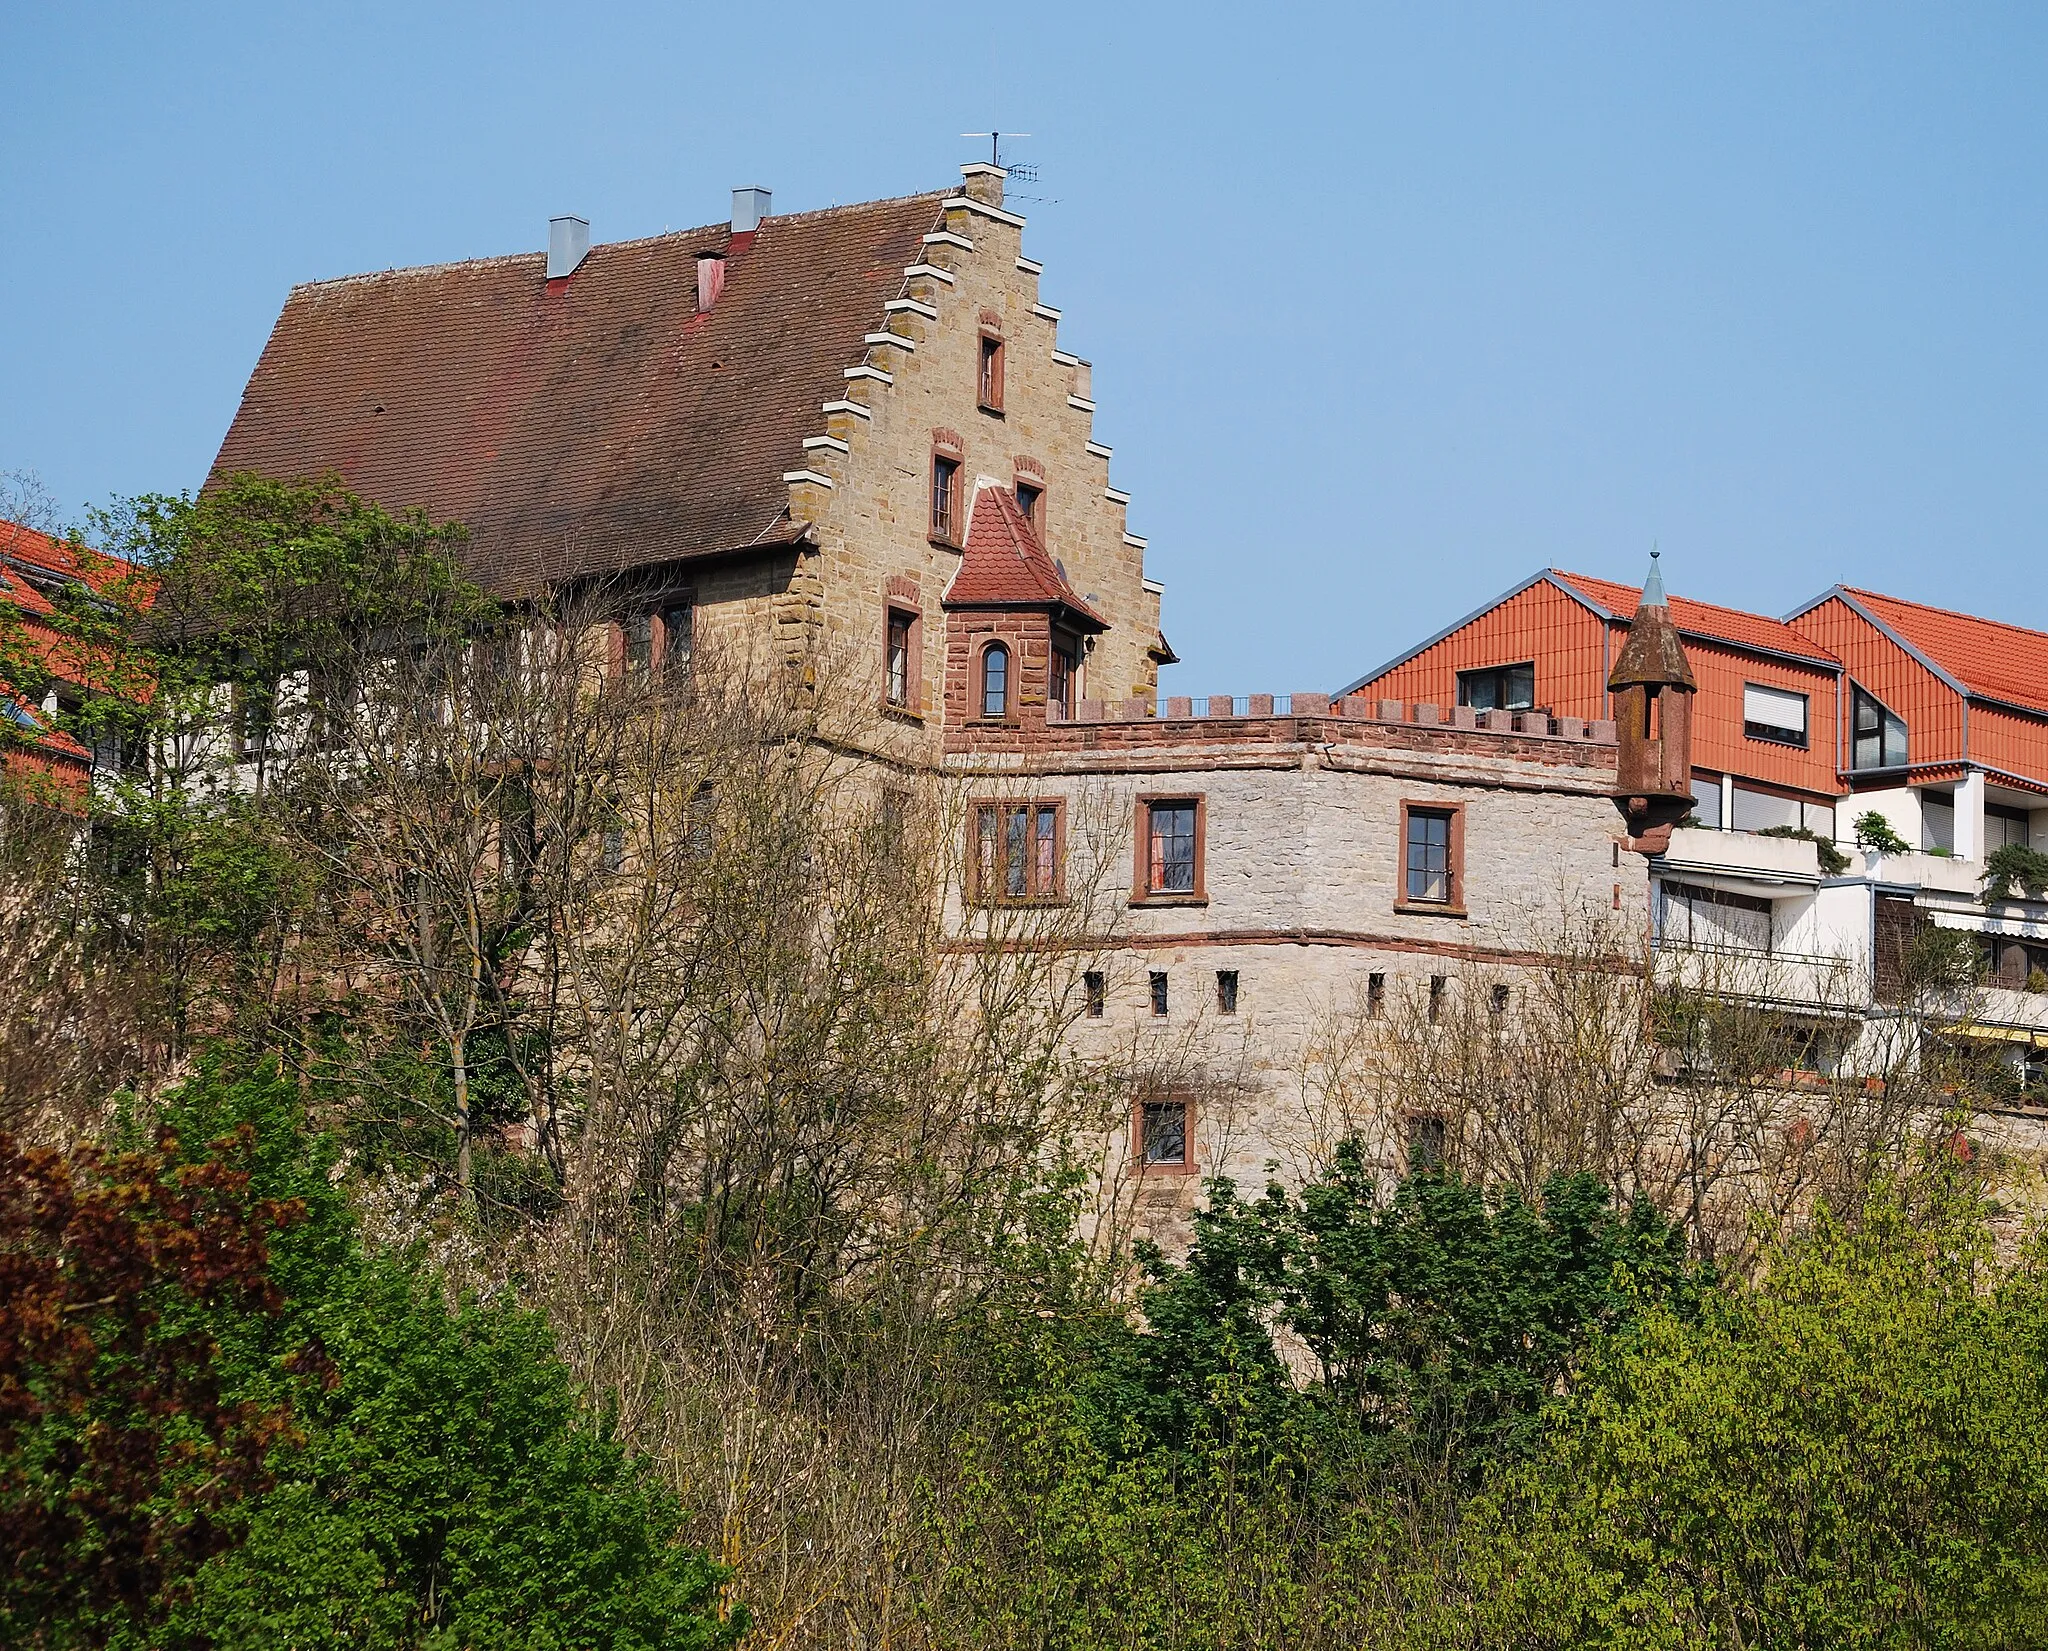 Photo showing: The castle in Höfingen in the German Federal State Baden-Württemberg. A view from the Glems valley.